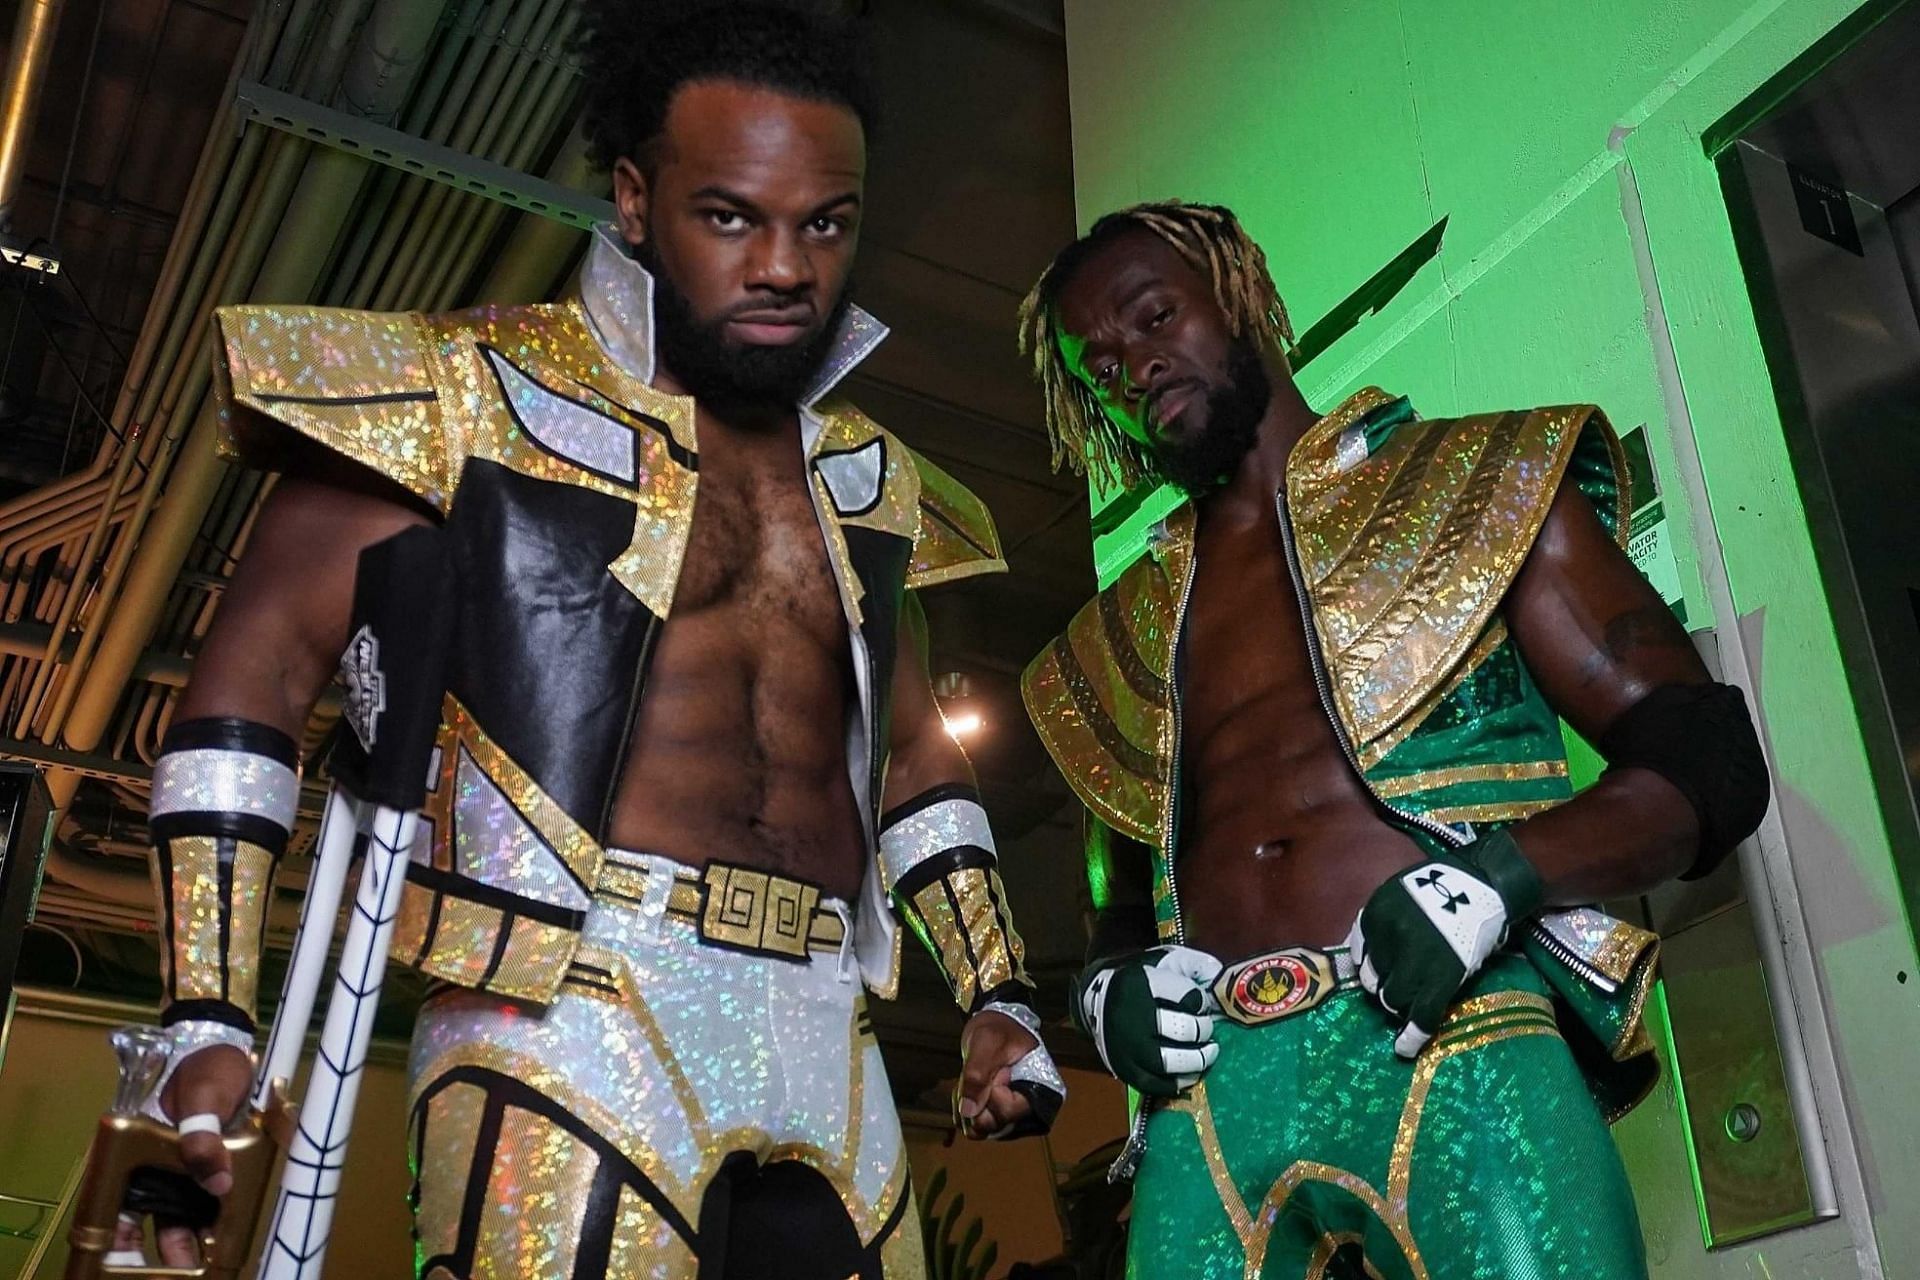 The New Day are 11-time Tag Team Champions in WWE